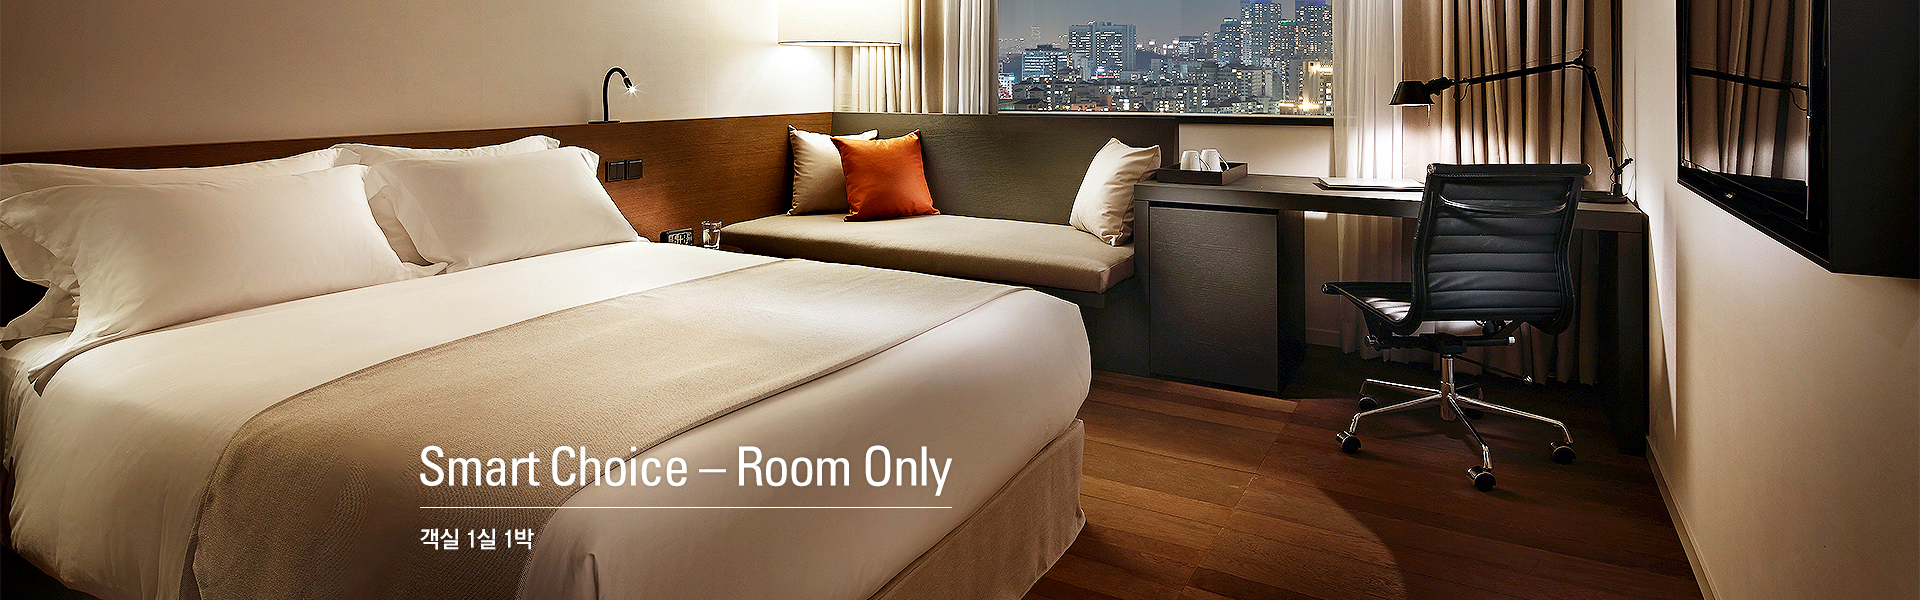 Smart Choice – Room Only